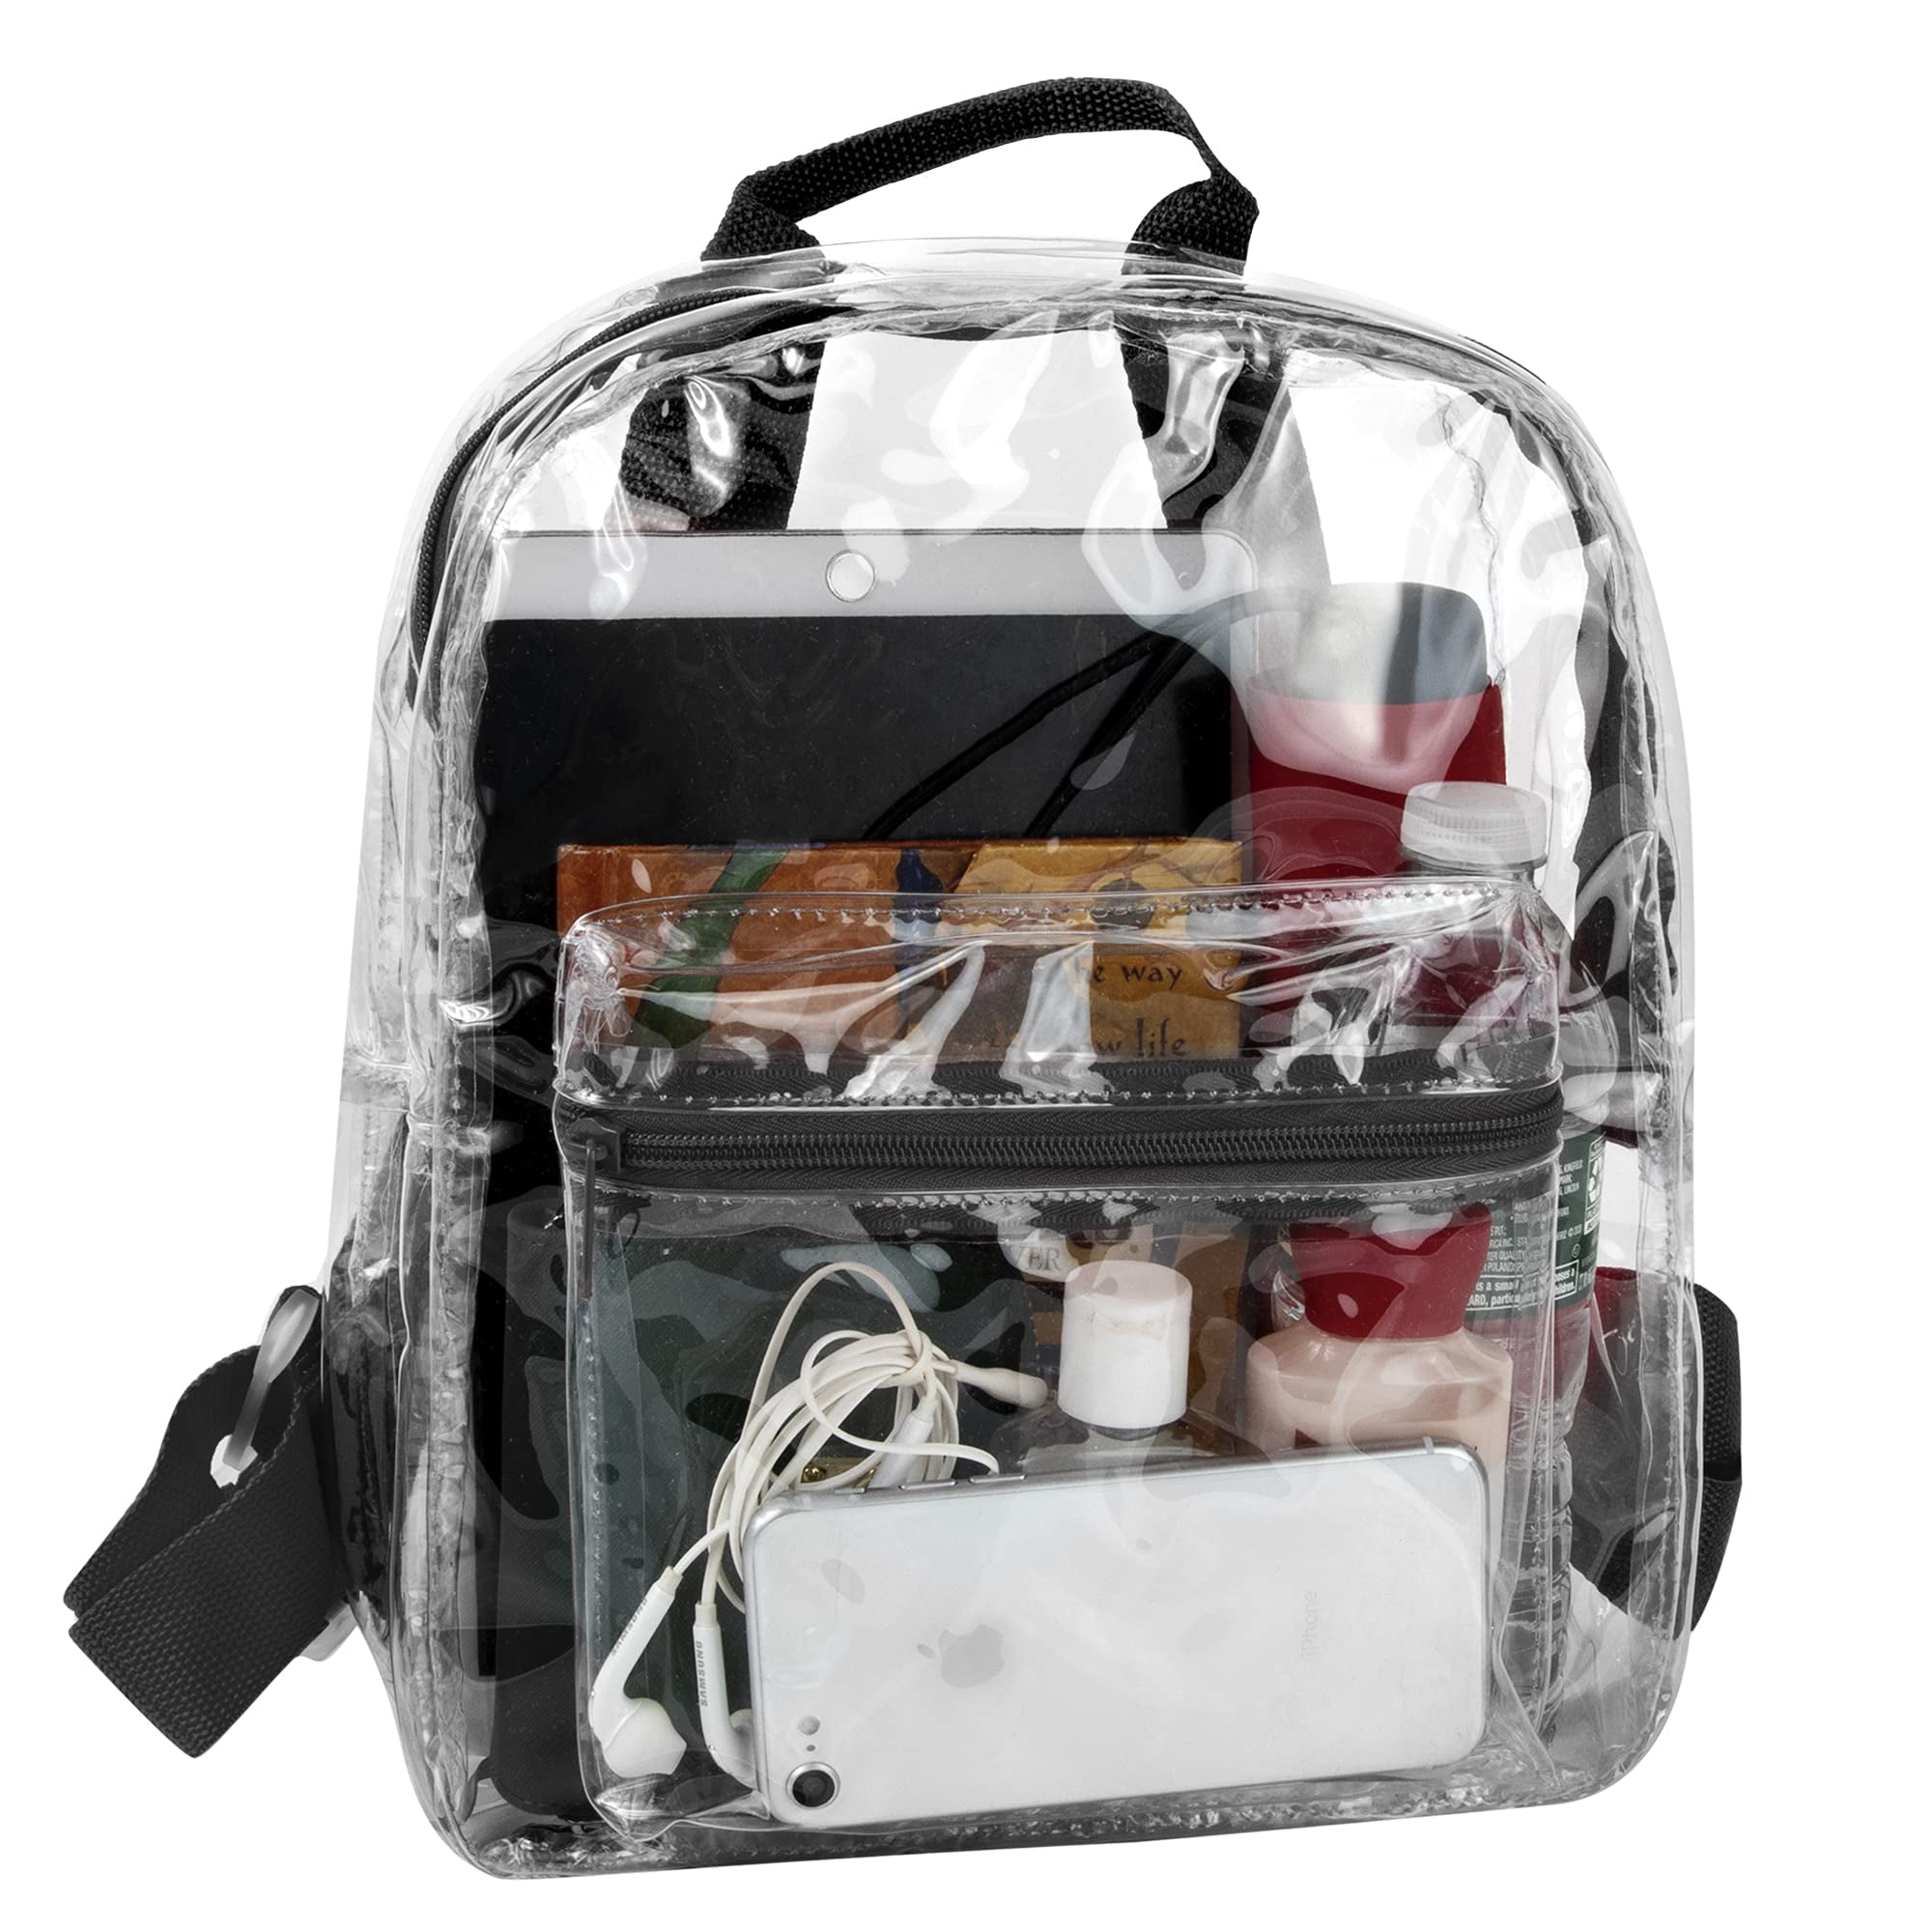 Stadium Approved Clear Mini Backpack 12x6x12 Small Clear Backpack See Through Transparent Stadium Backpacks 